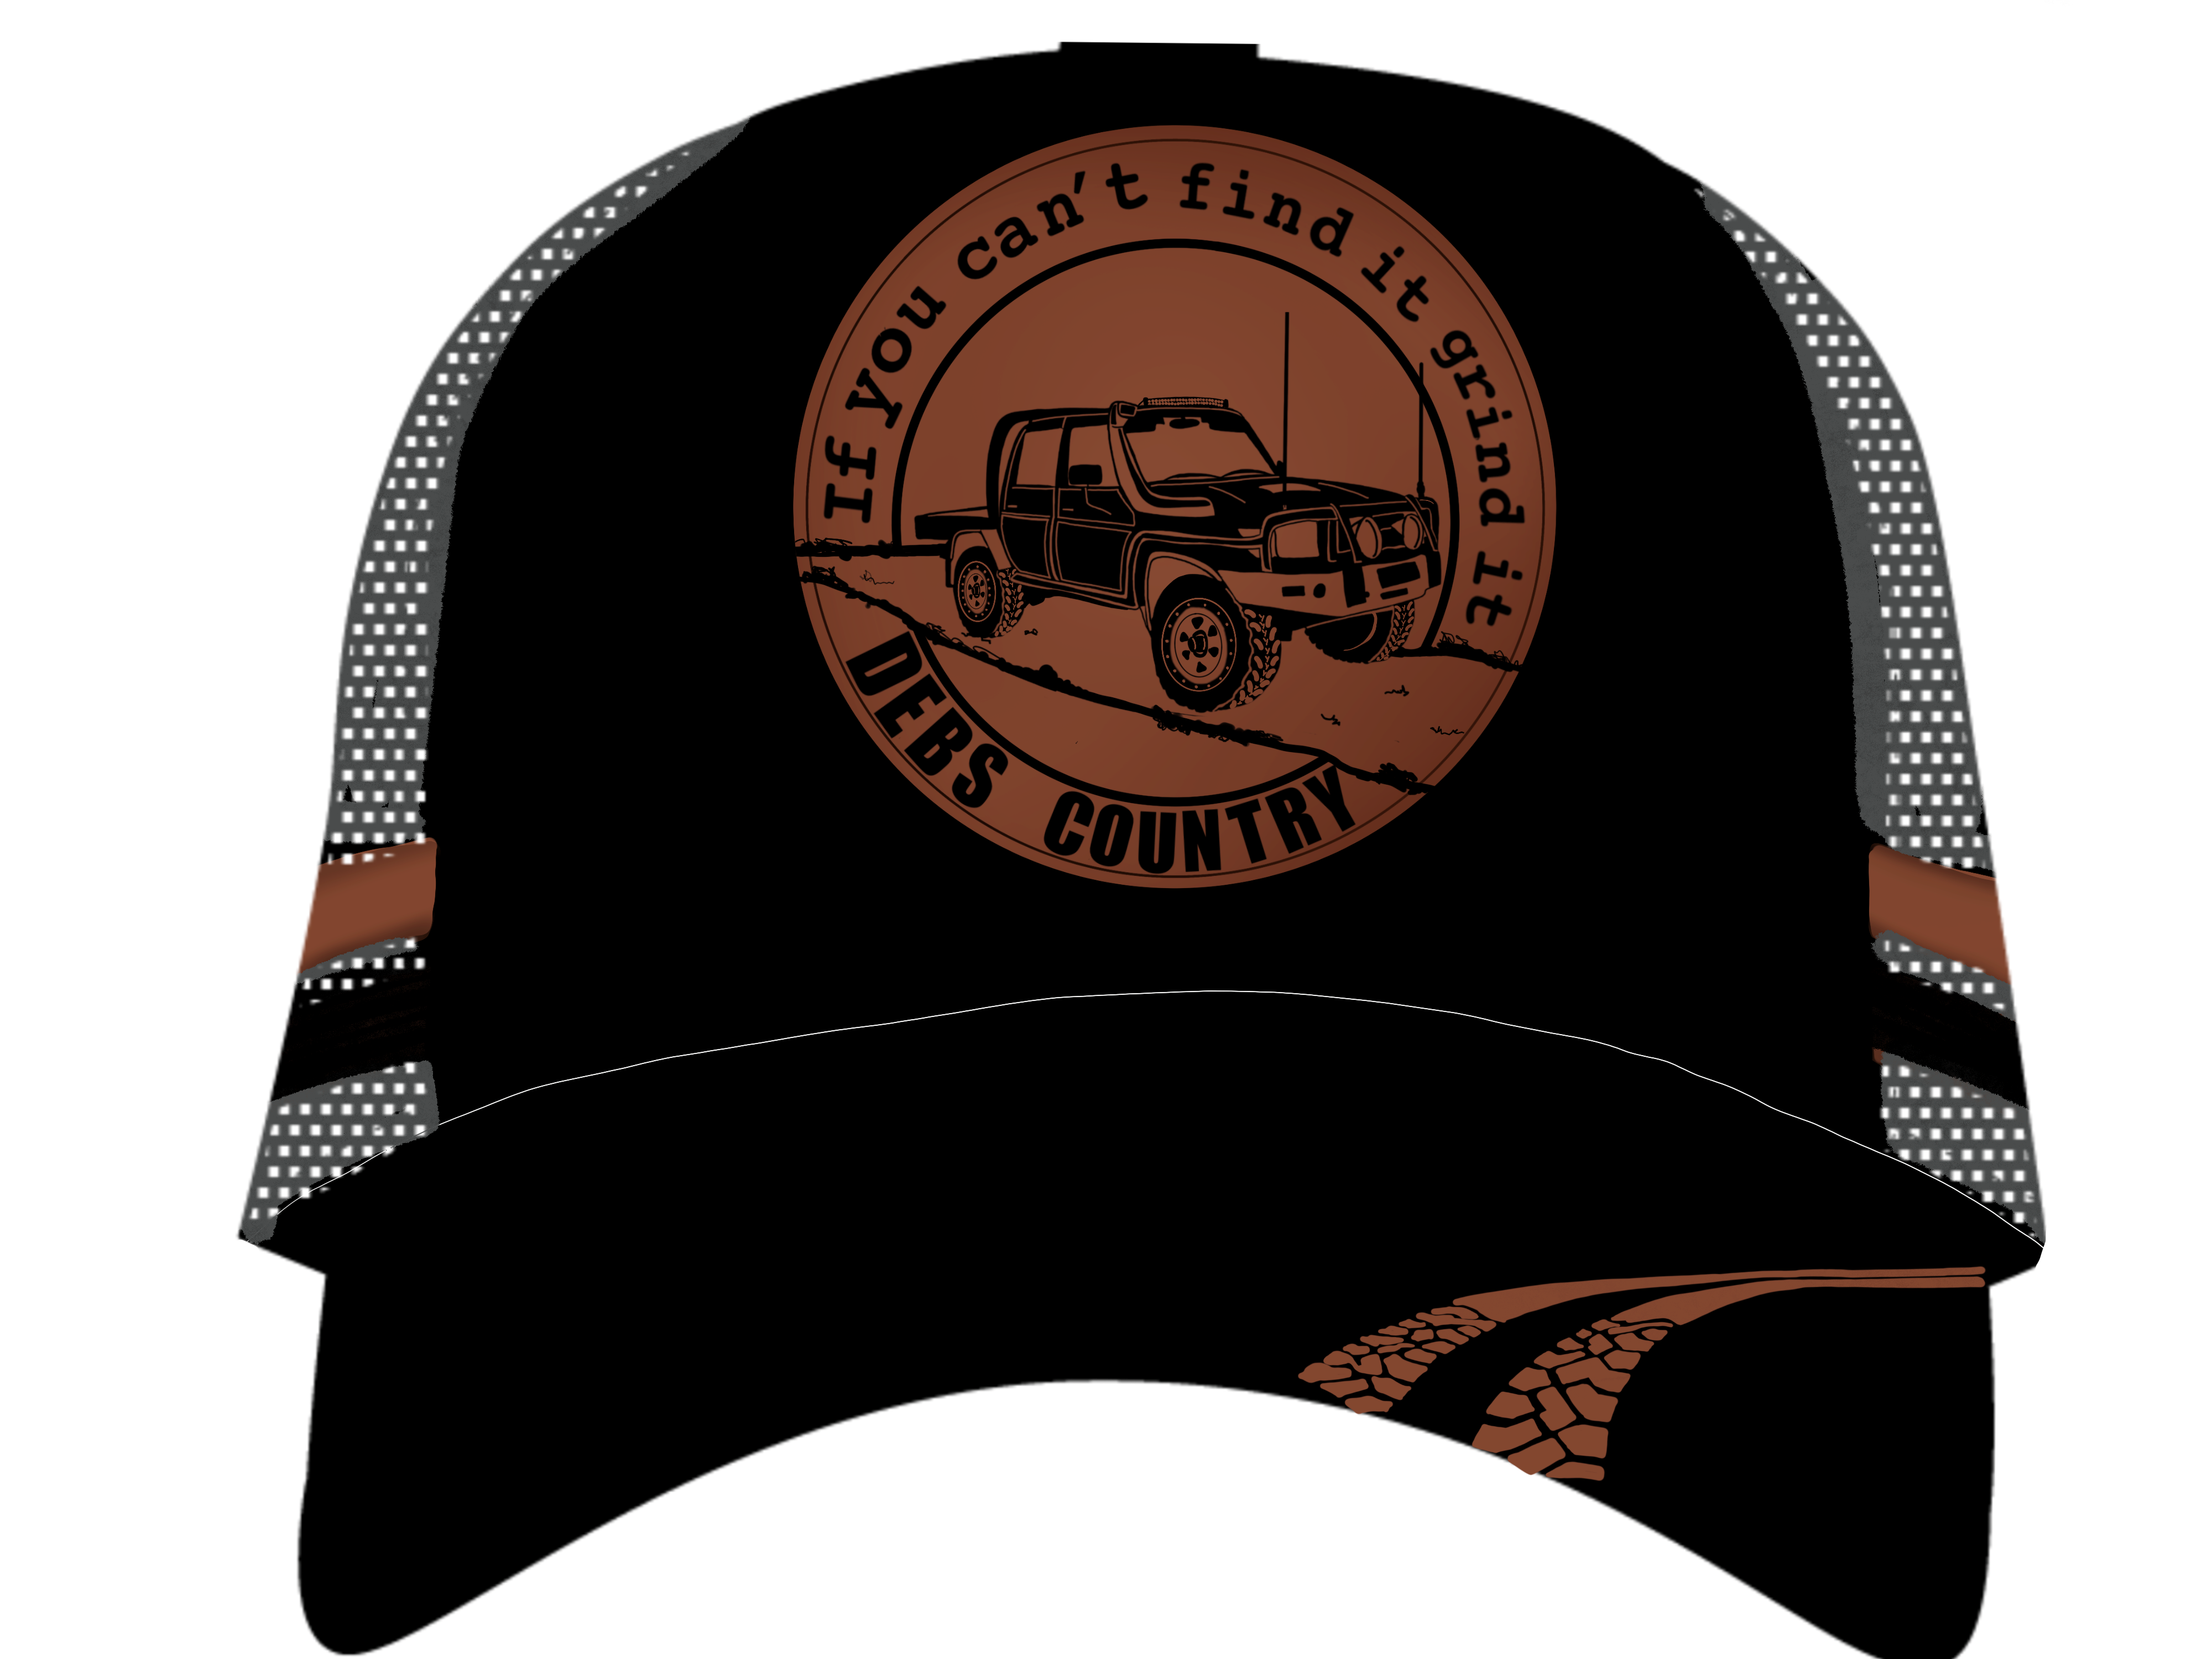 Debs Country Outfitters Black 'Grind it' Trucker Cap (6645165326413)